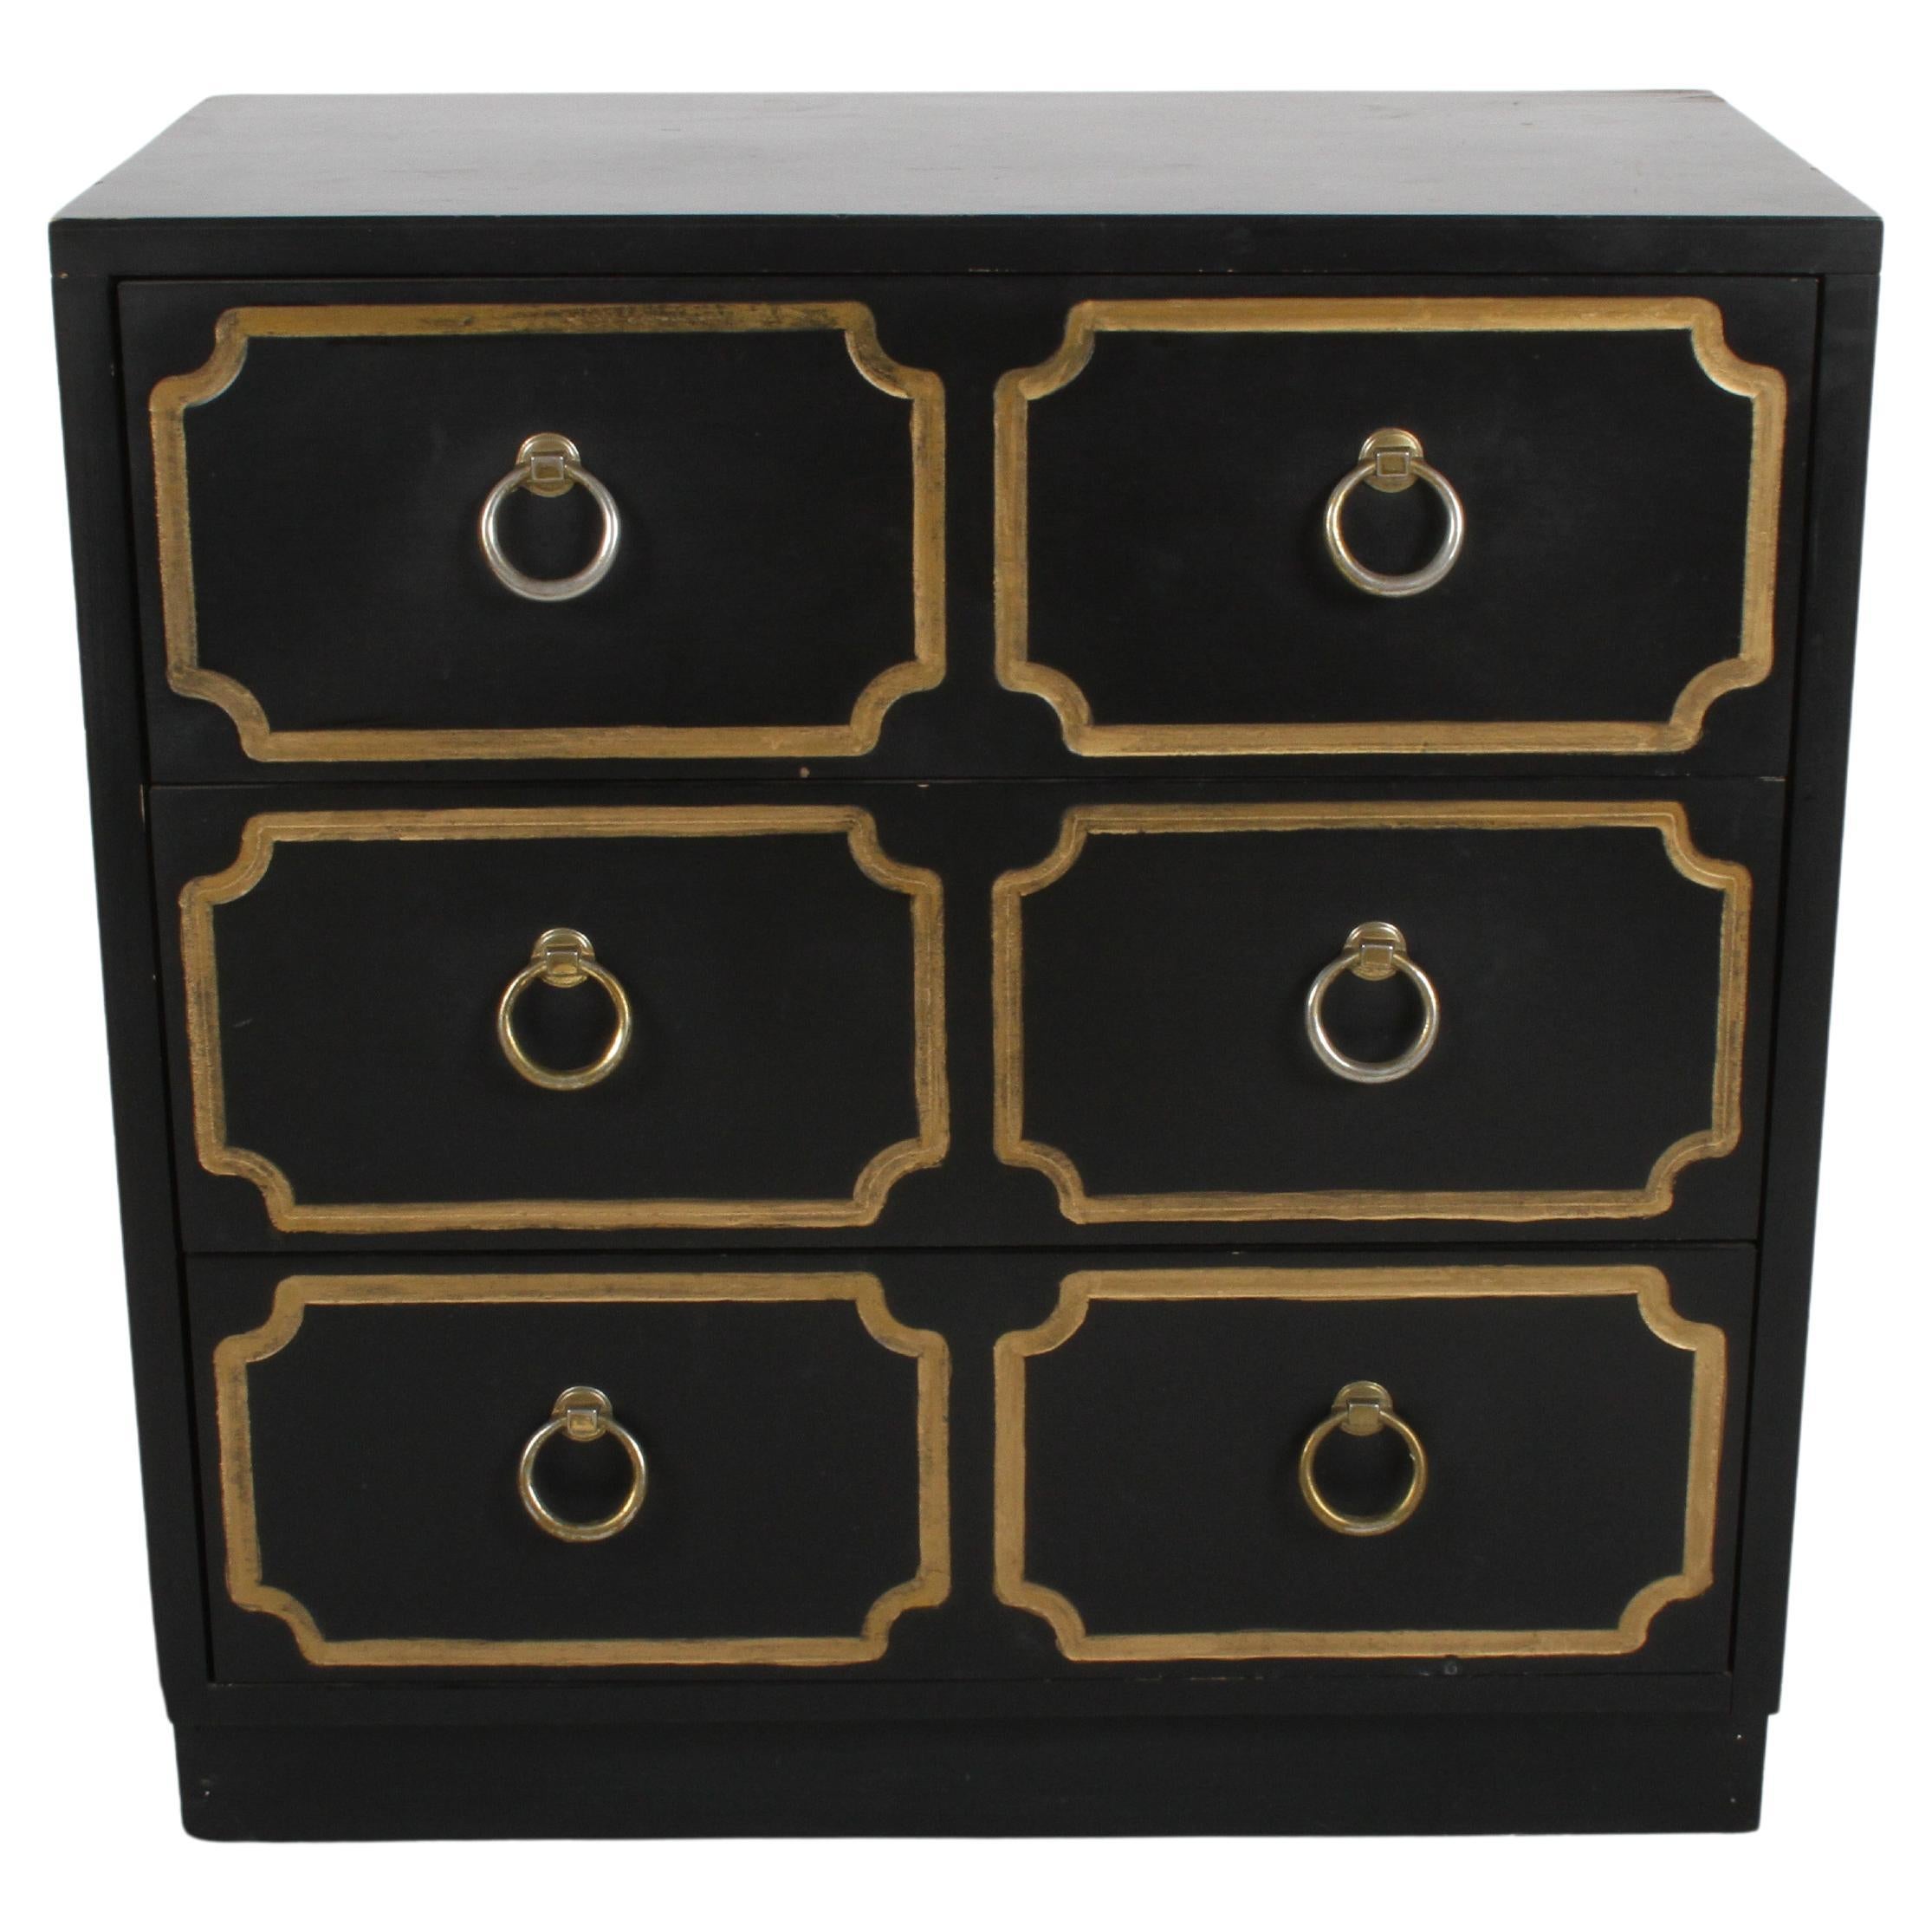 Dorothy Draper Style "España" Group Black & Gold Cabinet, Dresser or Night Stand For Sale